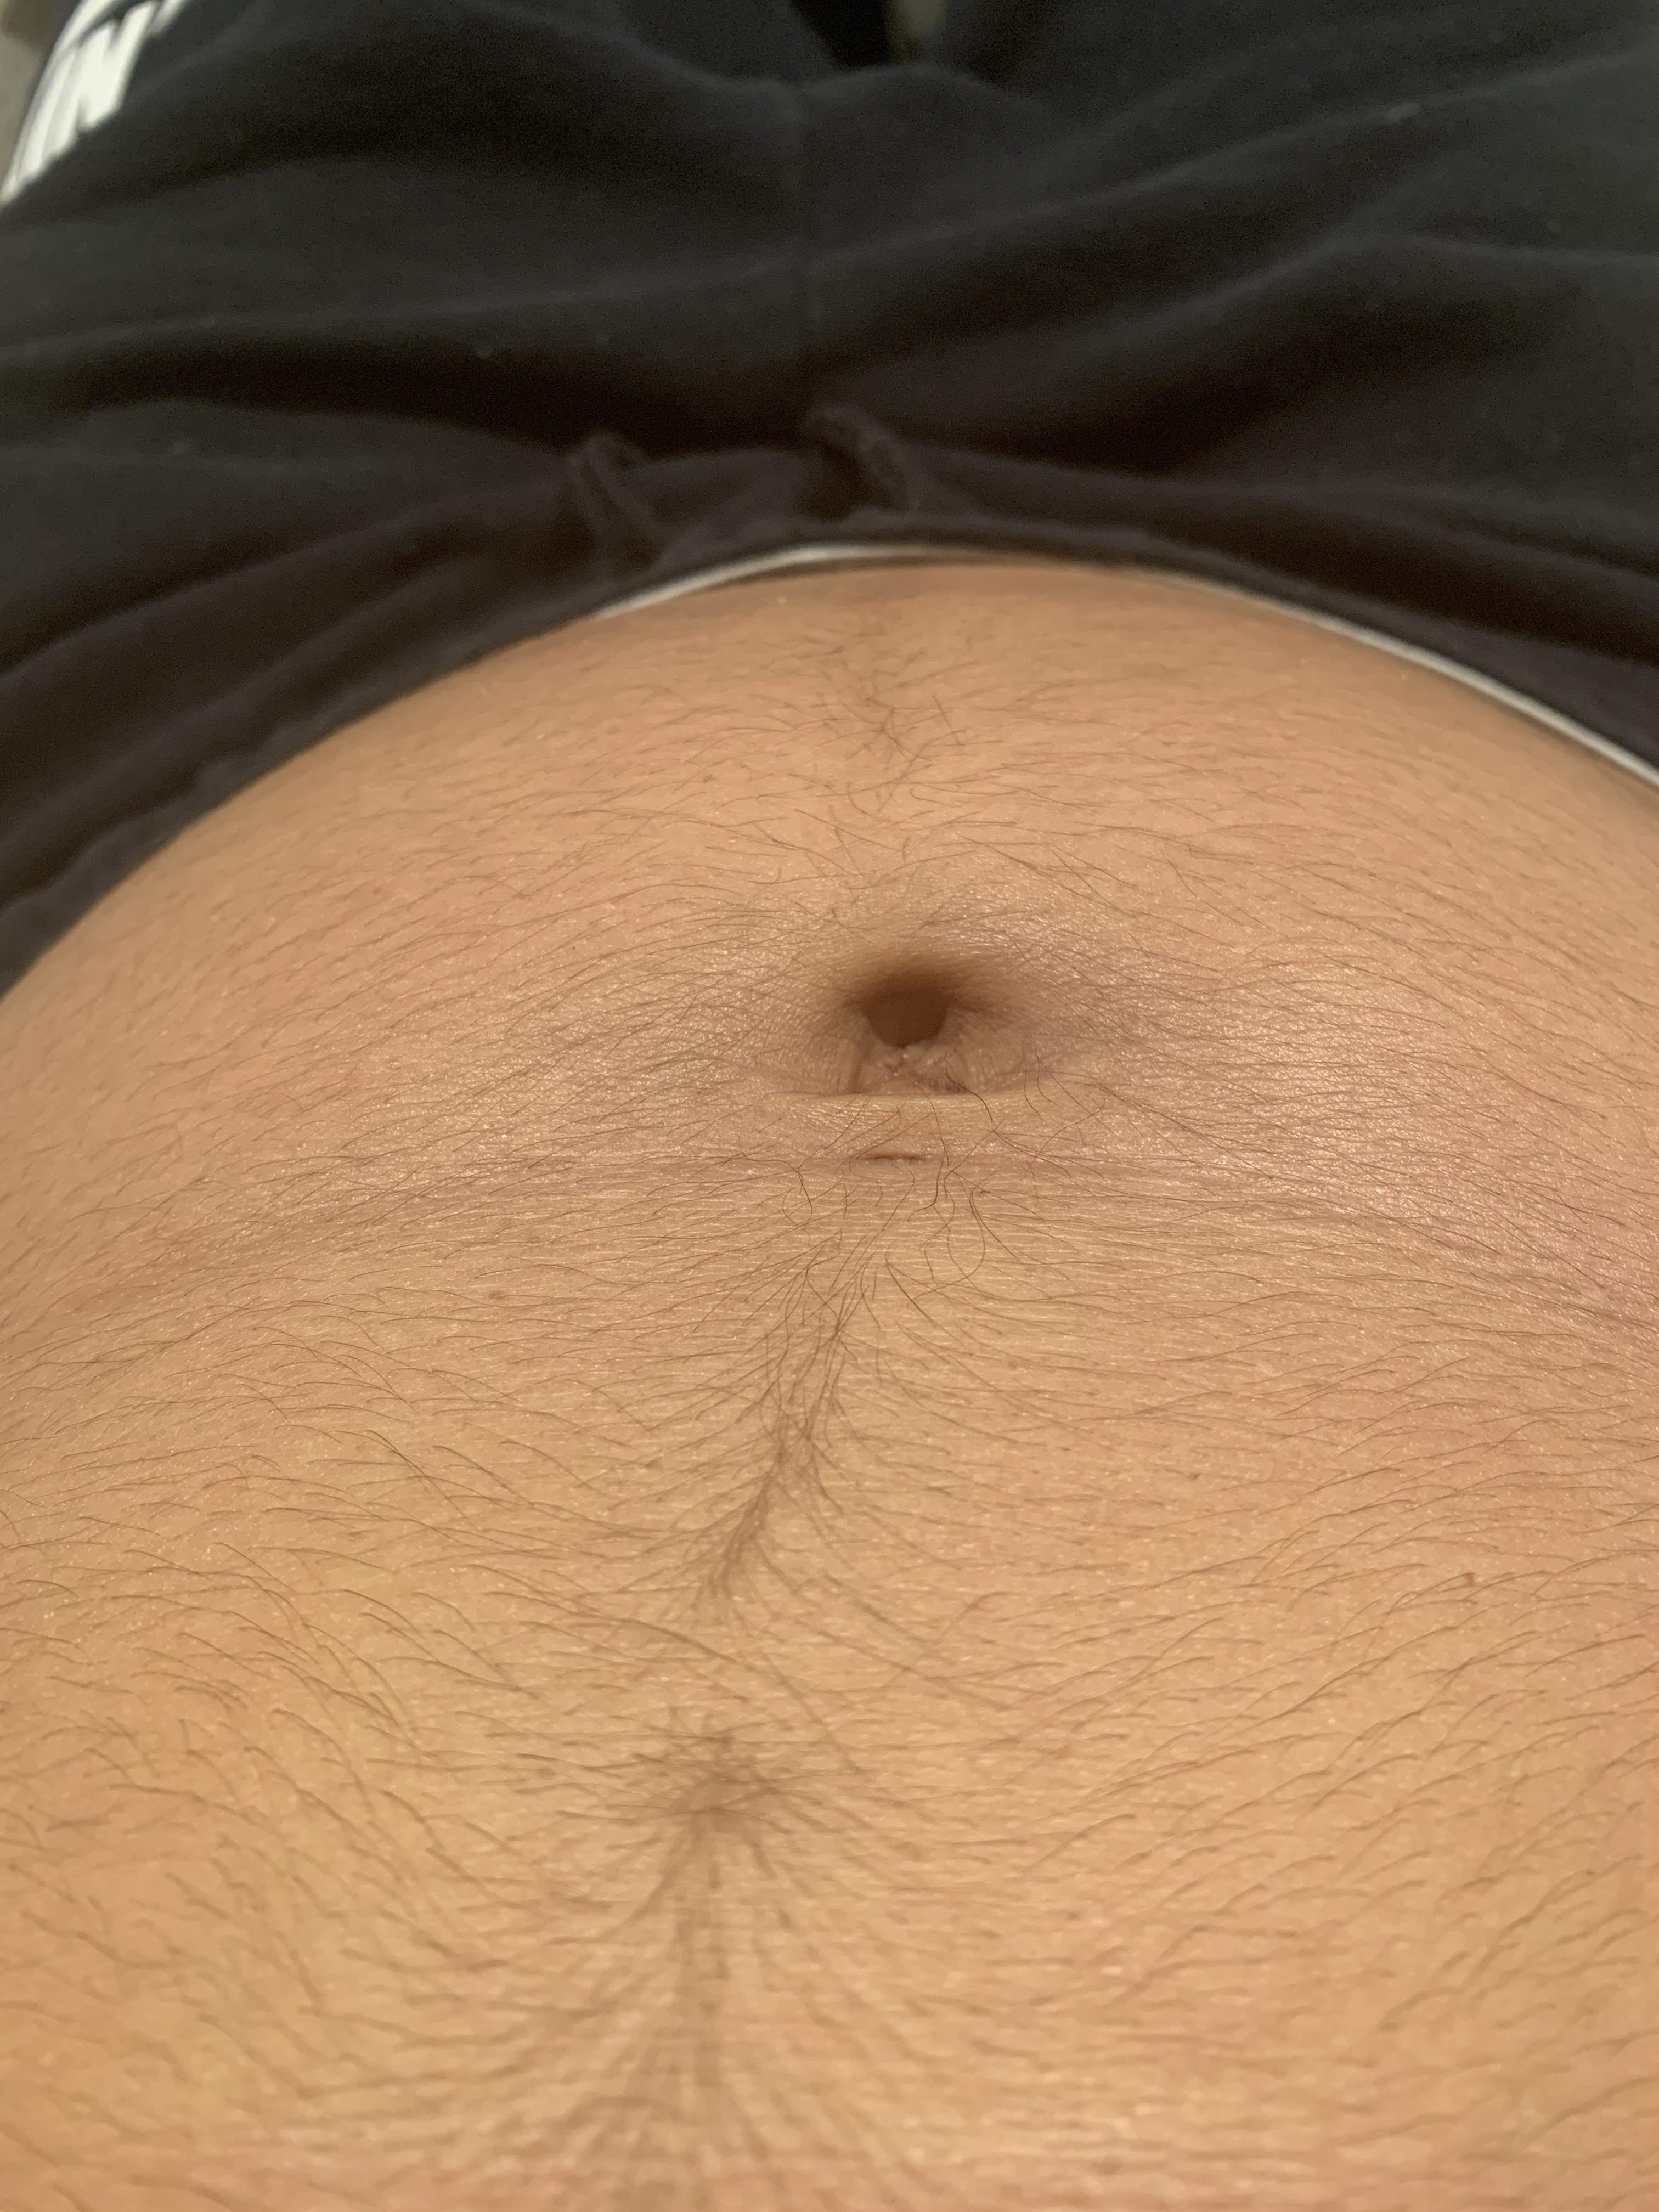 hairy stomach when pregnant